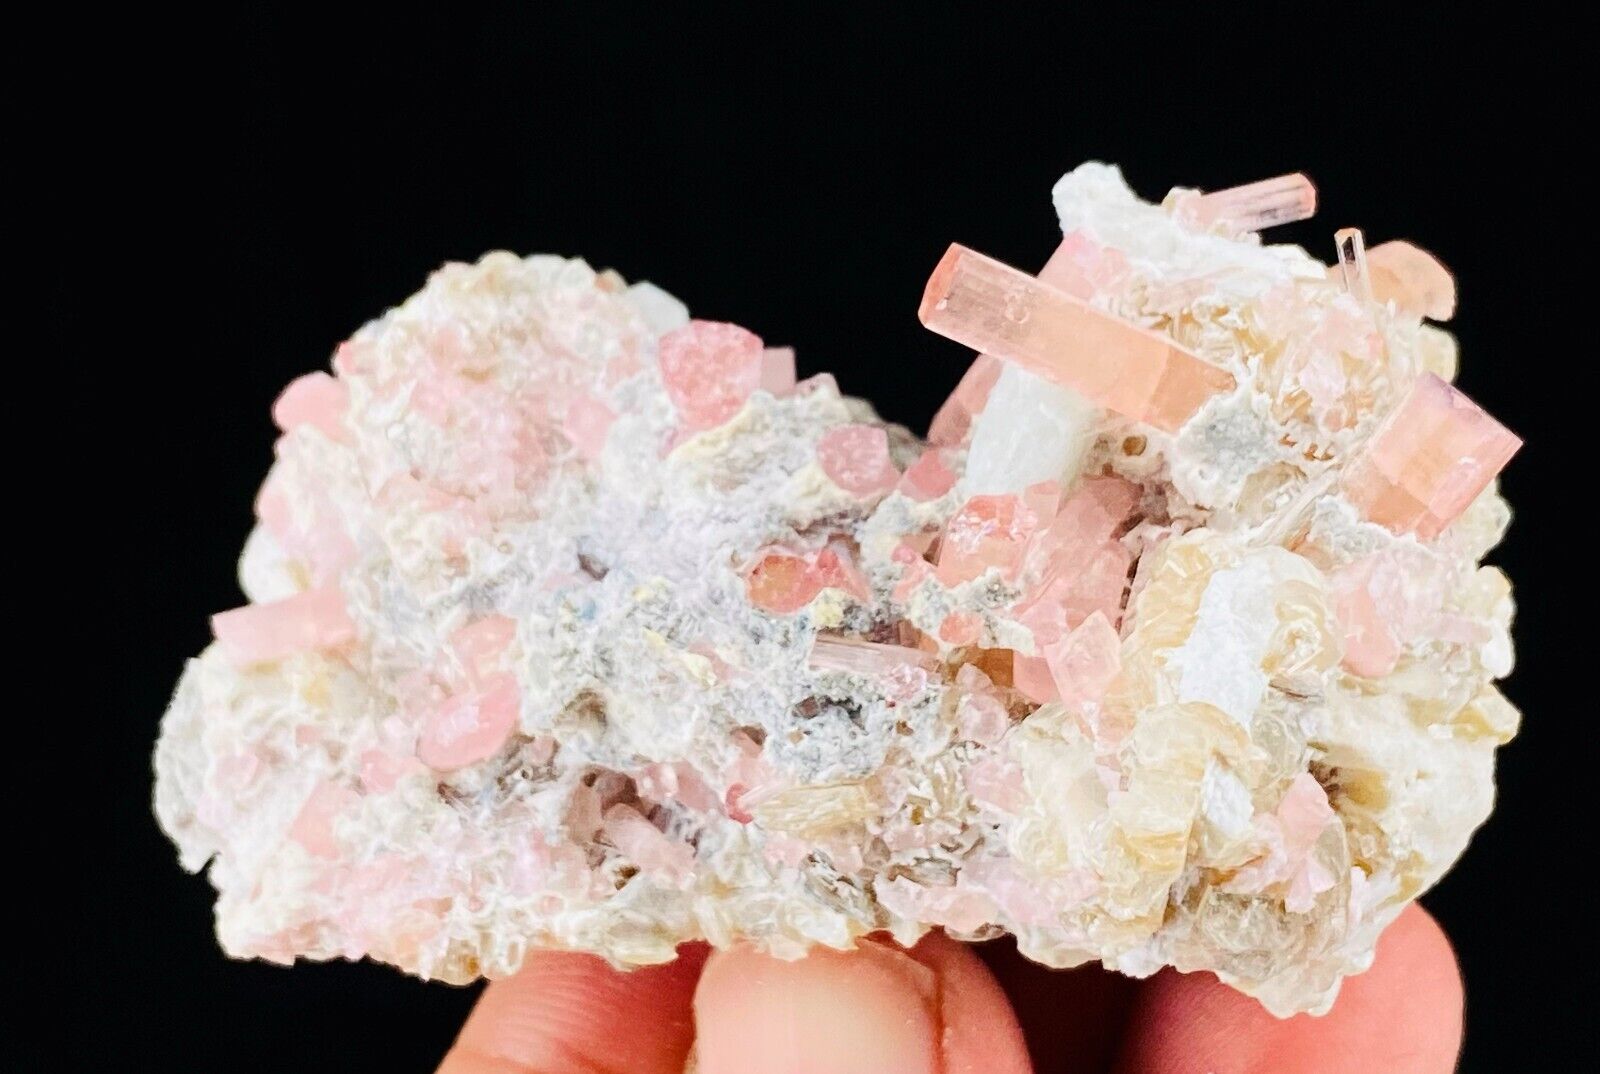 Hot Pink TOURMALINE Crystal Cluster On LEPIDOLITE and ALBITE Crystals Matrix